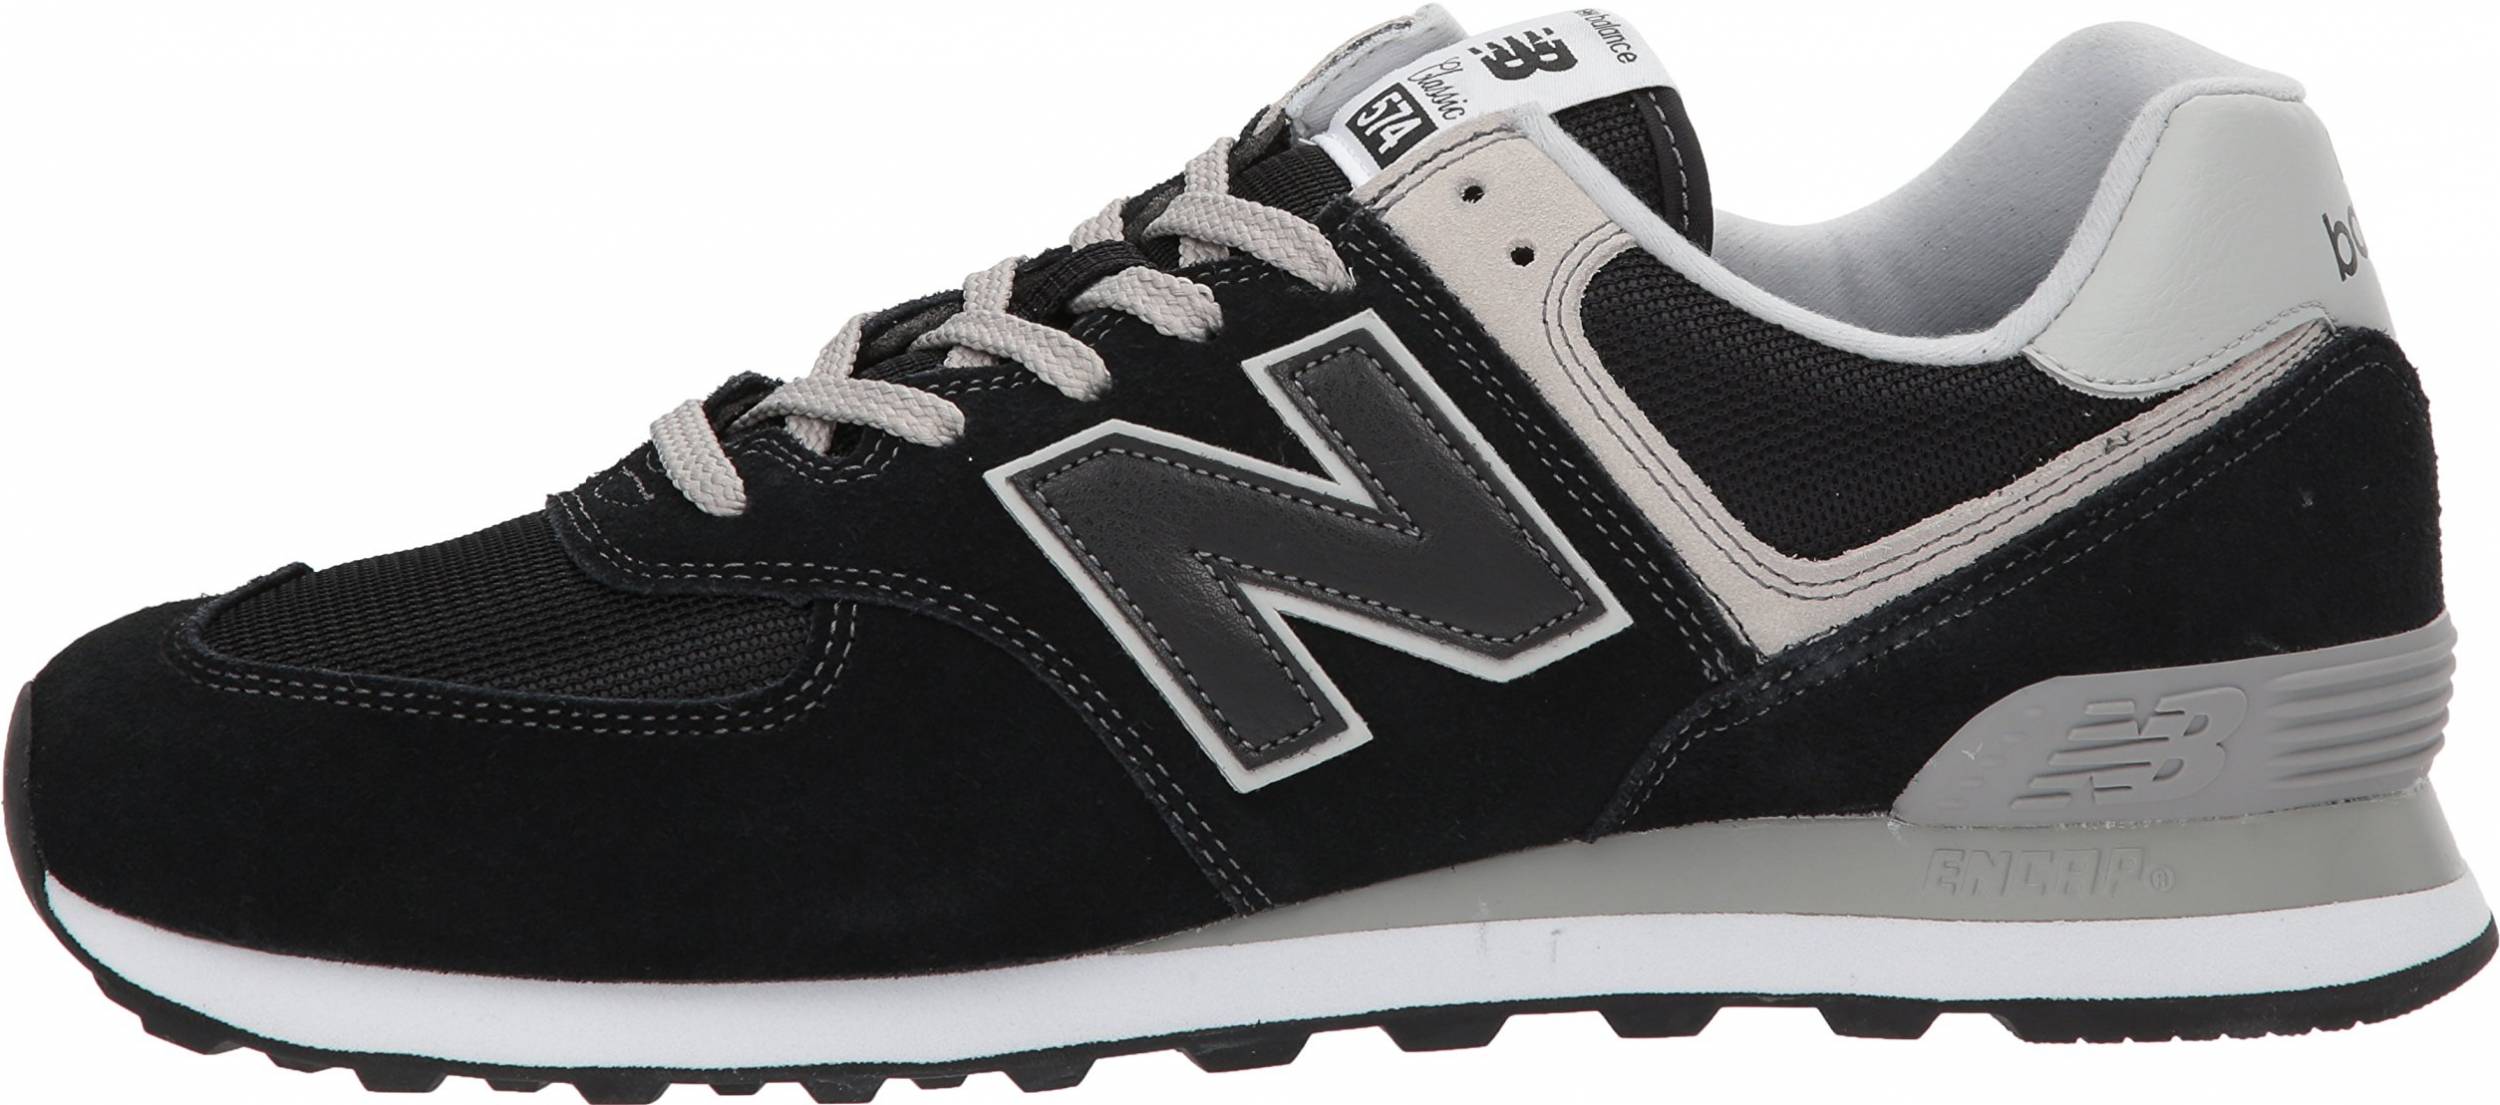 10+ New Balance 574 sneakers: Save up to 51% | RunRepeat